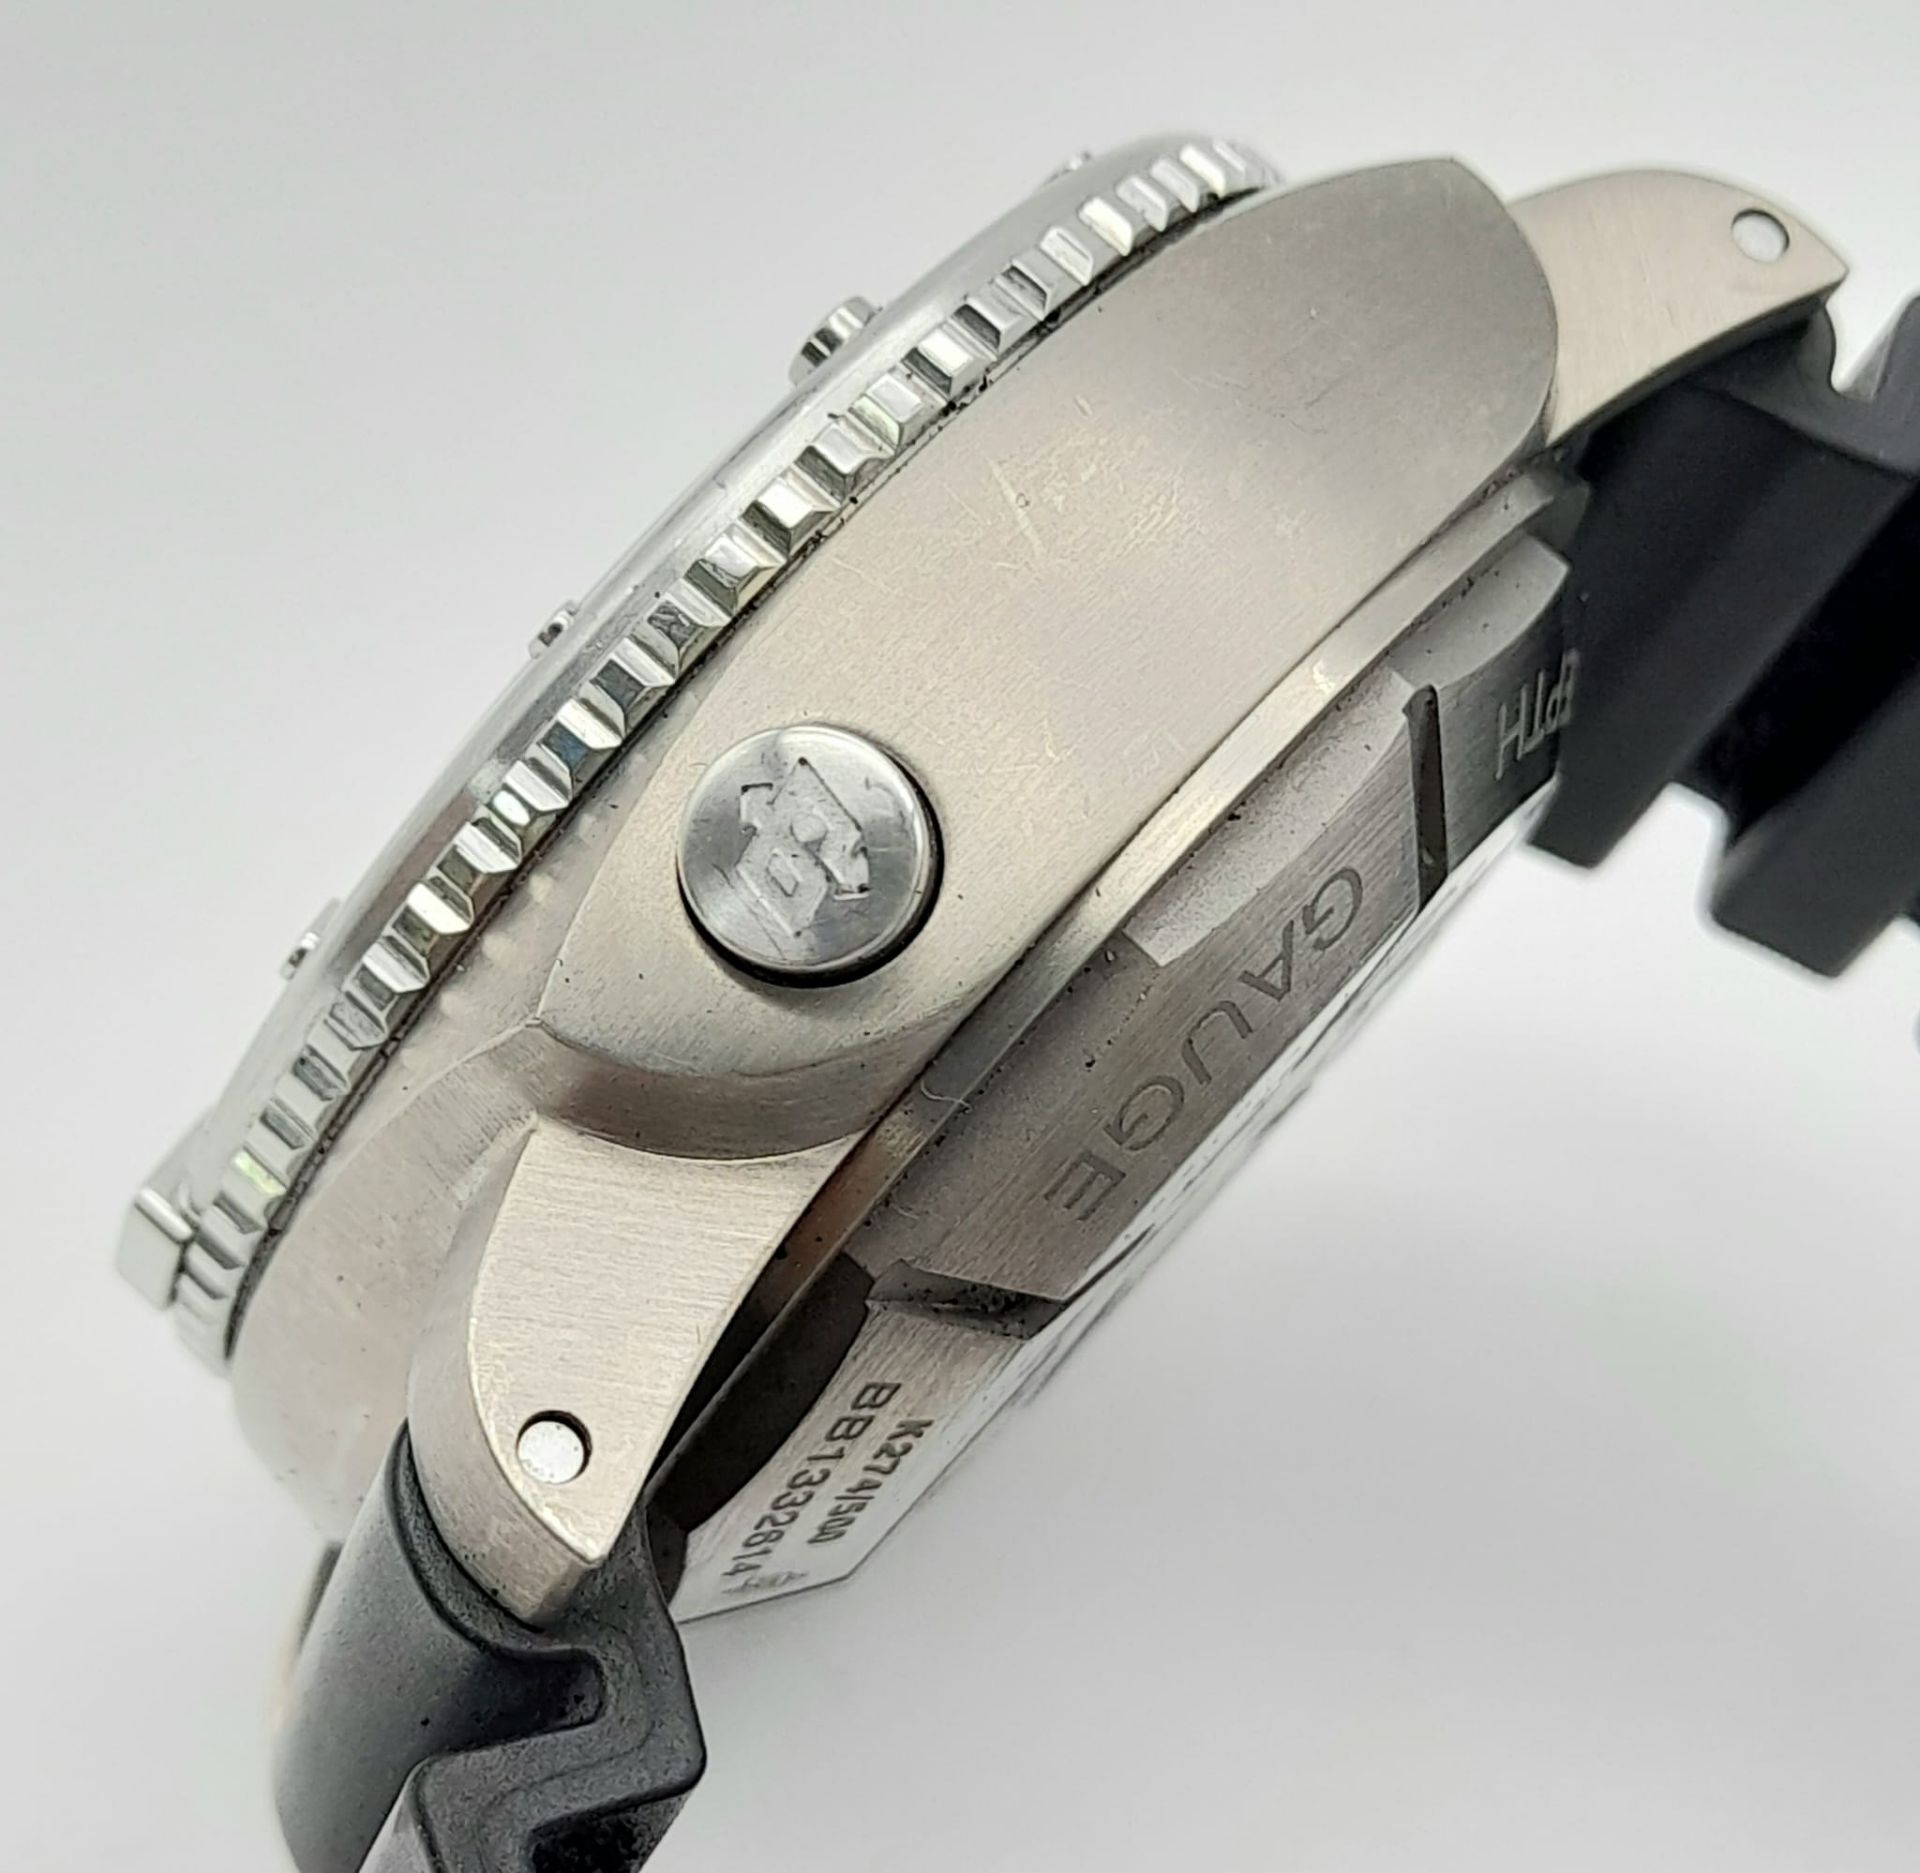 An Incredible Limited Edition Panerai Luminor 1950 Depth Gauge Automatic Gents Watch. A special - Image 6 of 21